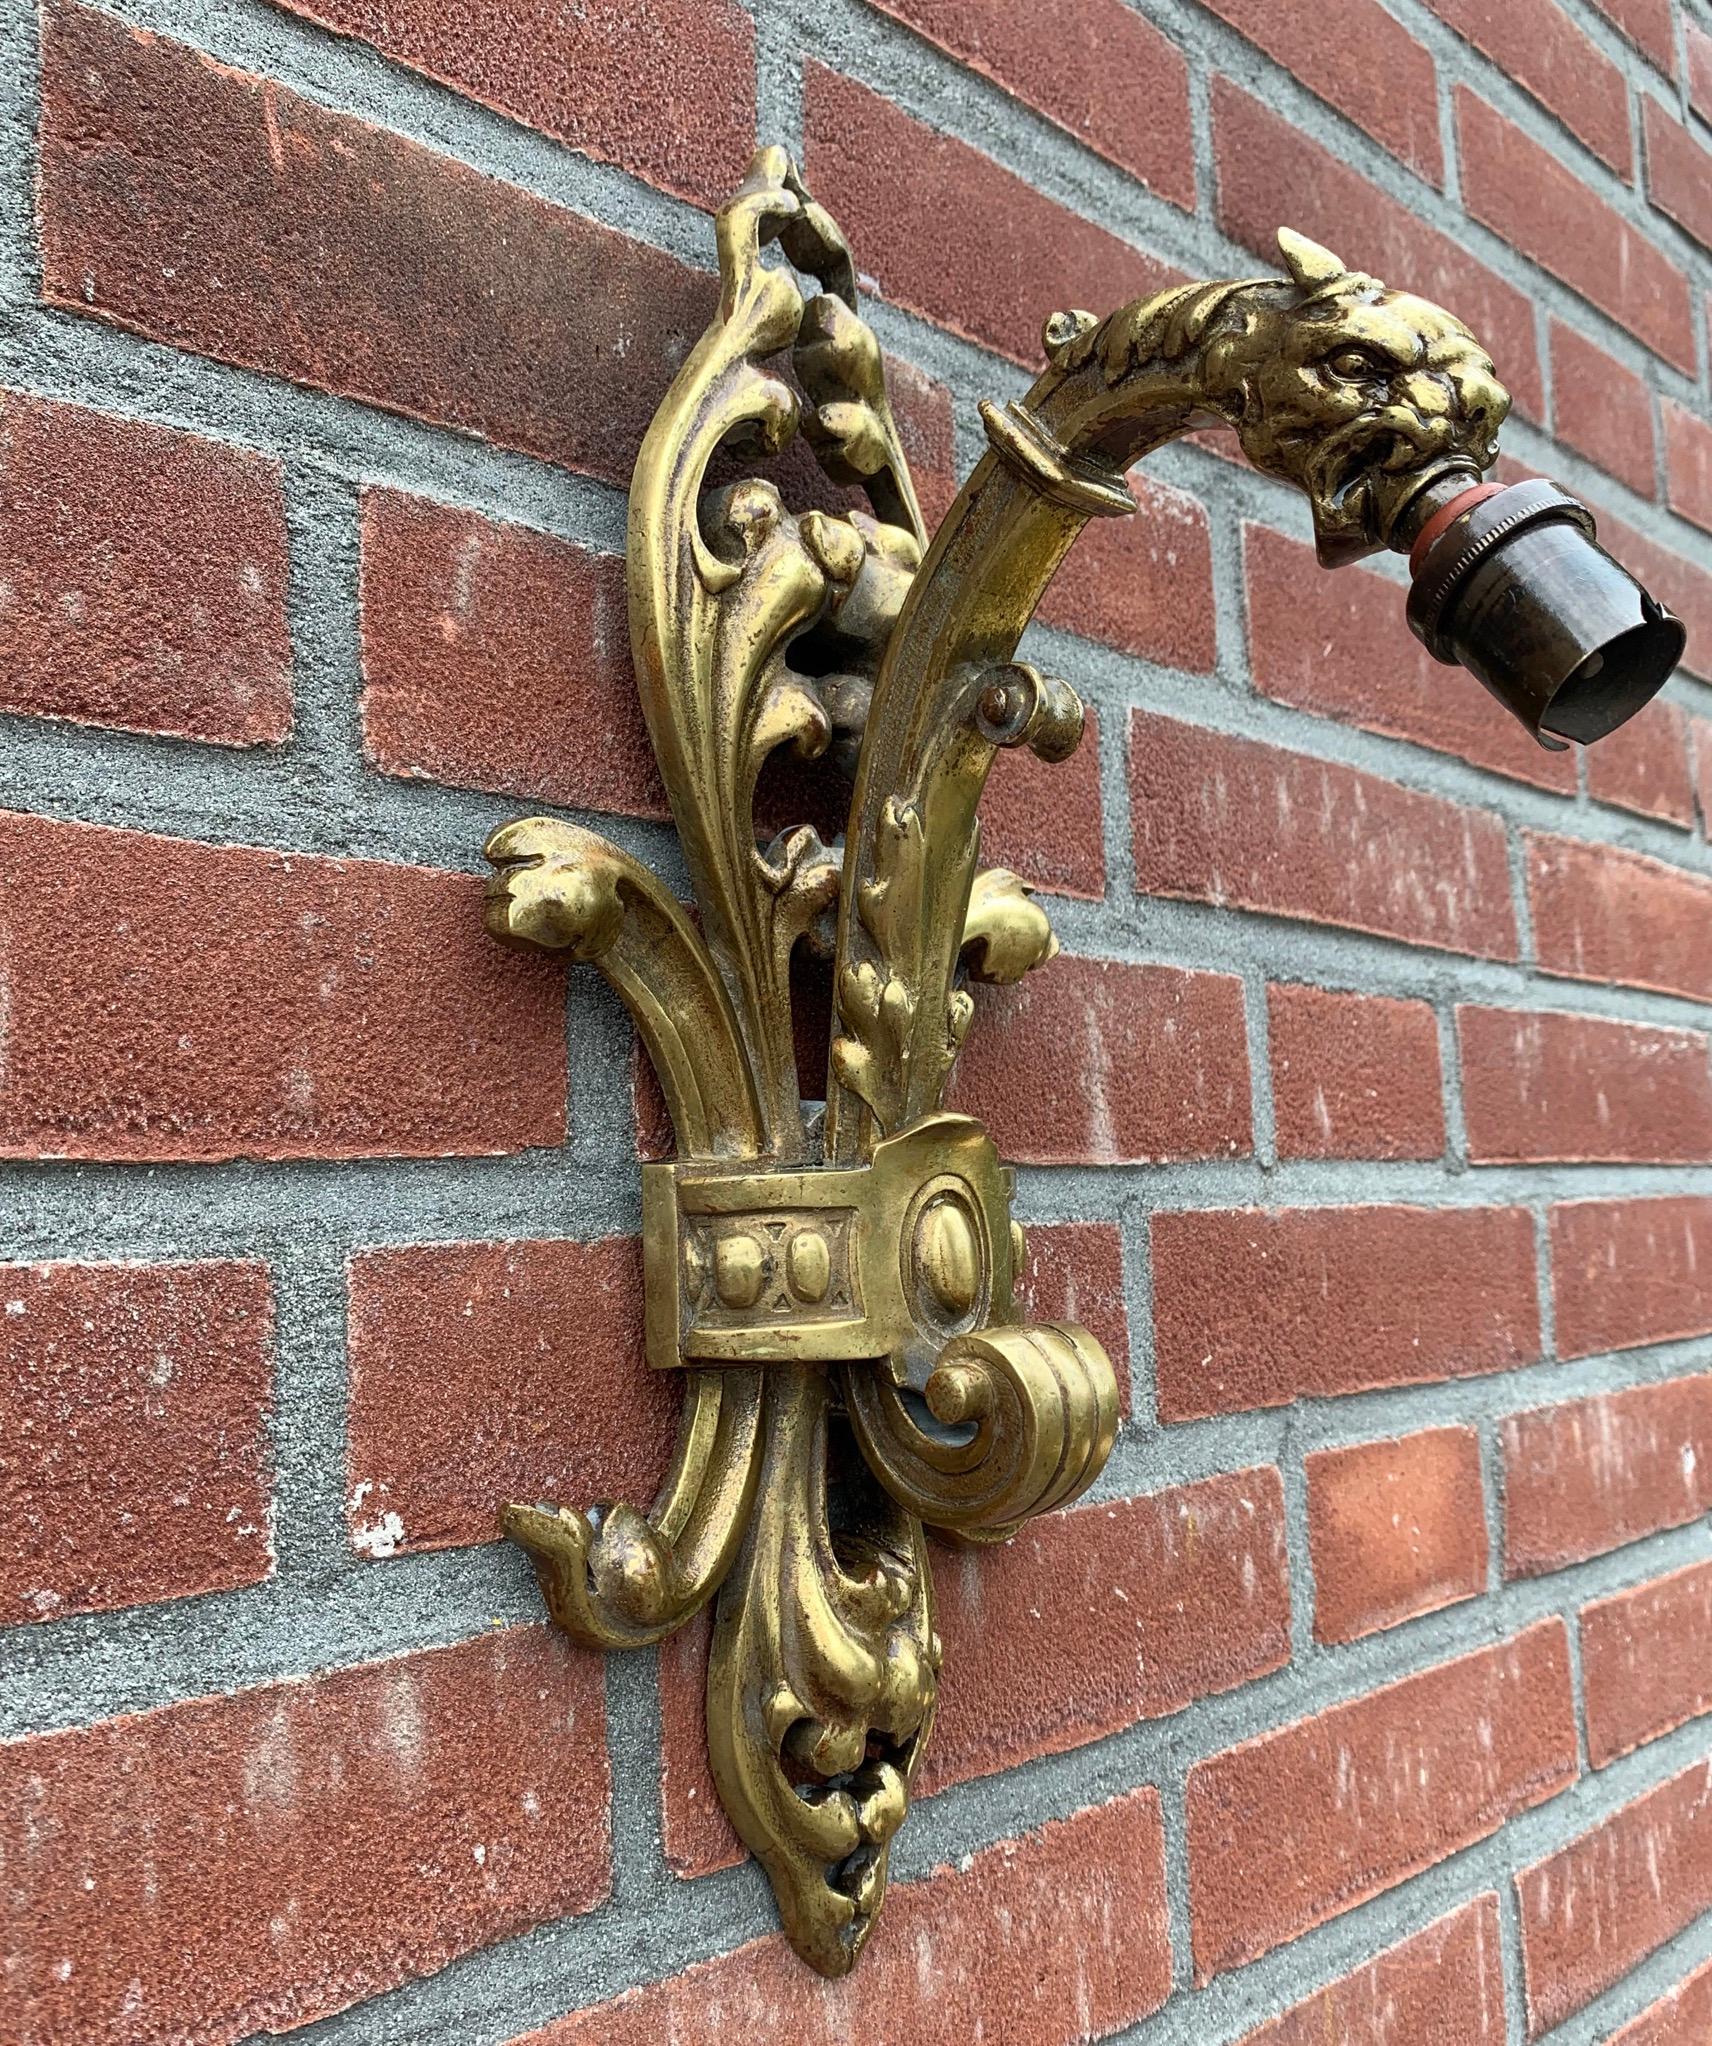 20th Century Rare Pair of Antique Gothic Revival Bronze Wall Sconces with Dragon Sculptures For Sale